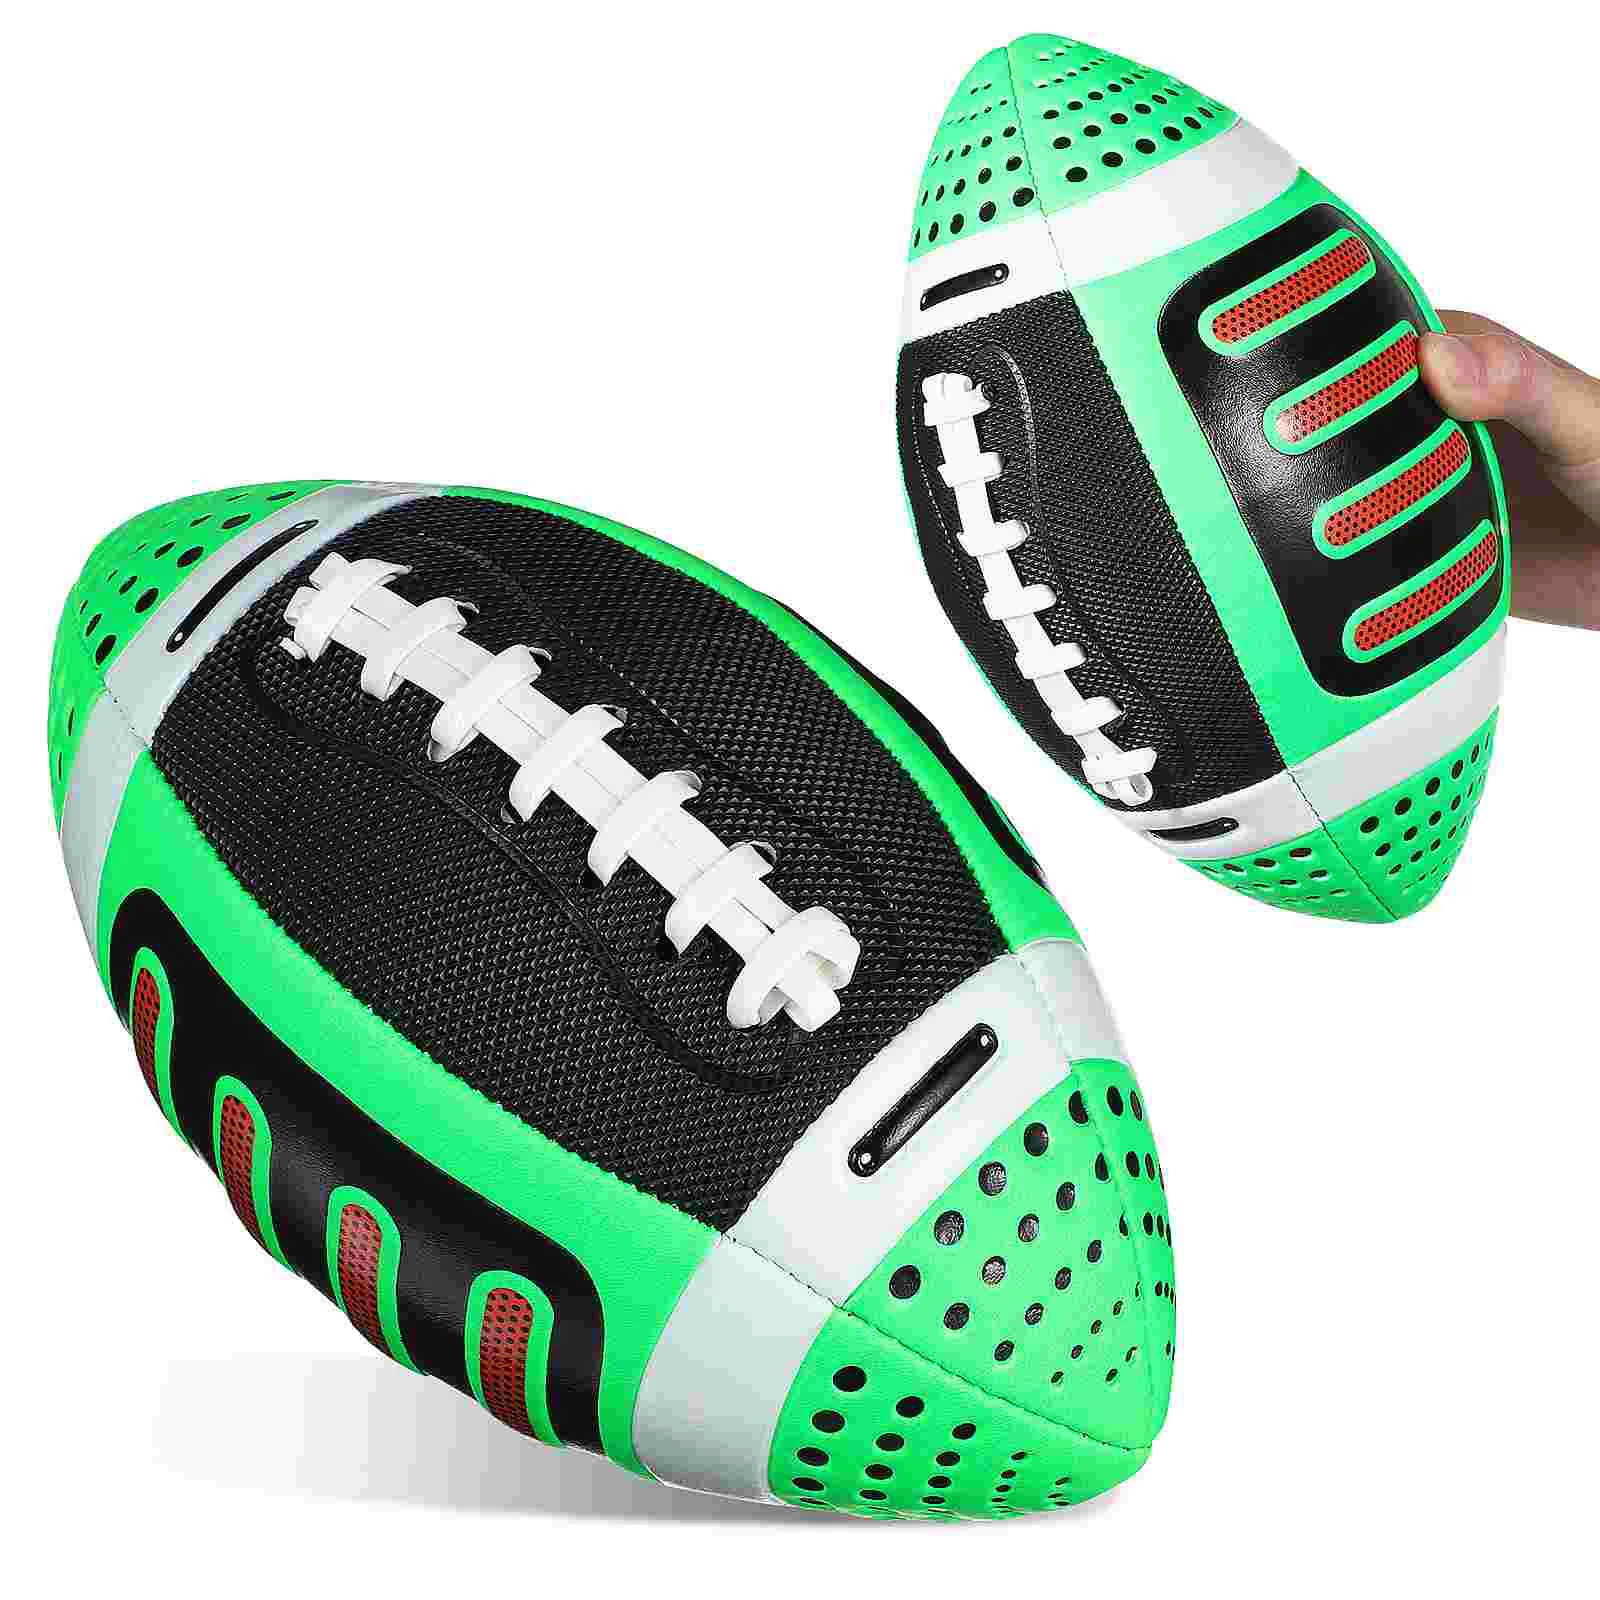 

Kids Football Product Kids Outdoor Rugby Soccer Style Training Practice Beach